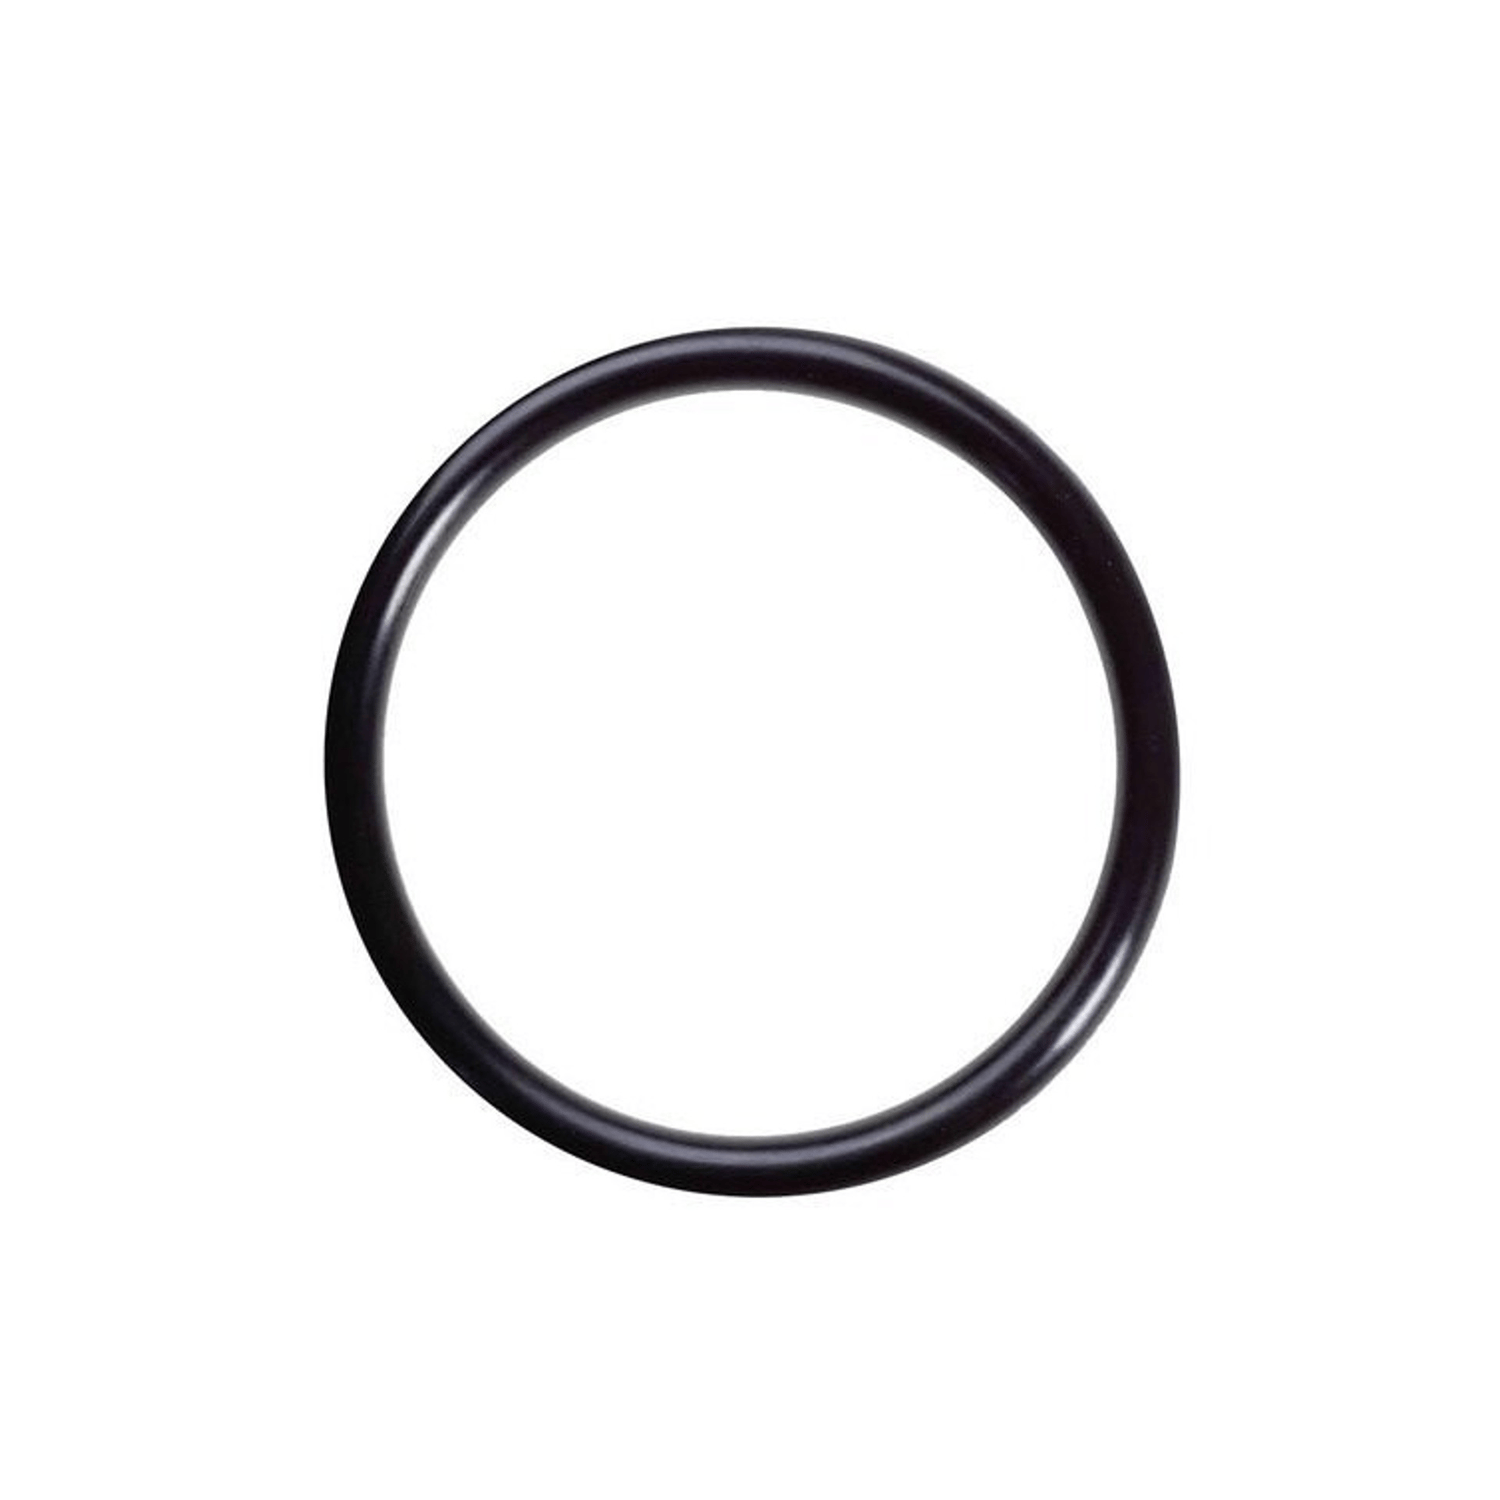 O-rings 7.8 x 1.9 mm 1 pc HNBR rubber, for air conditioners R12 & R134a